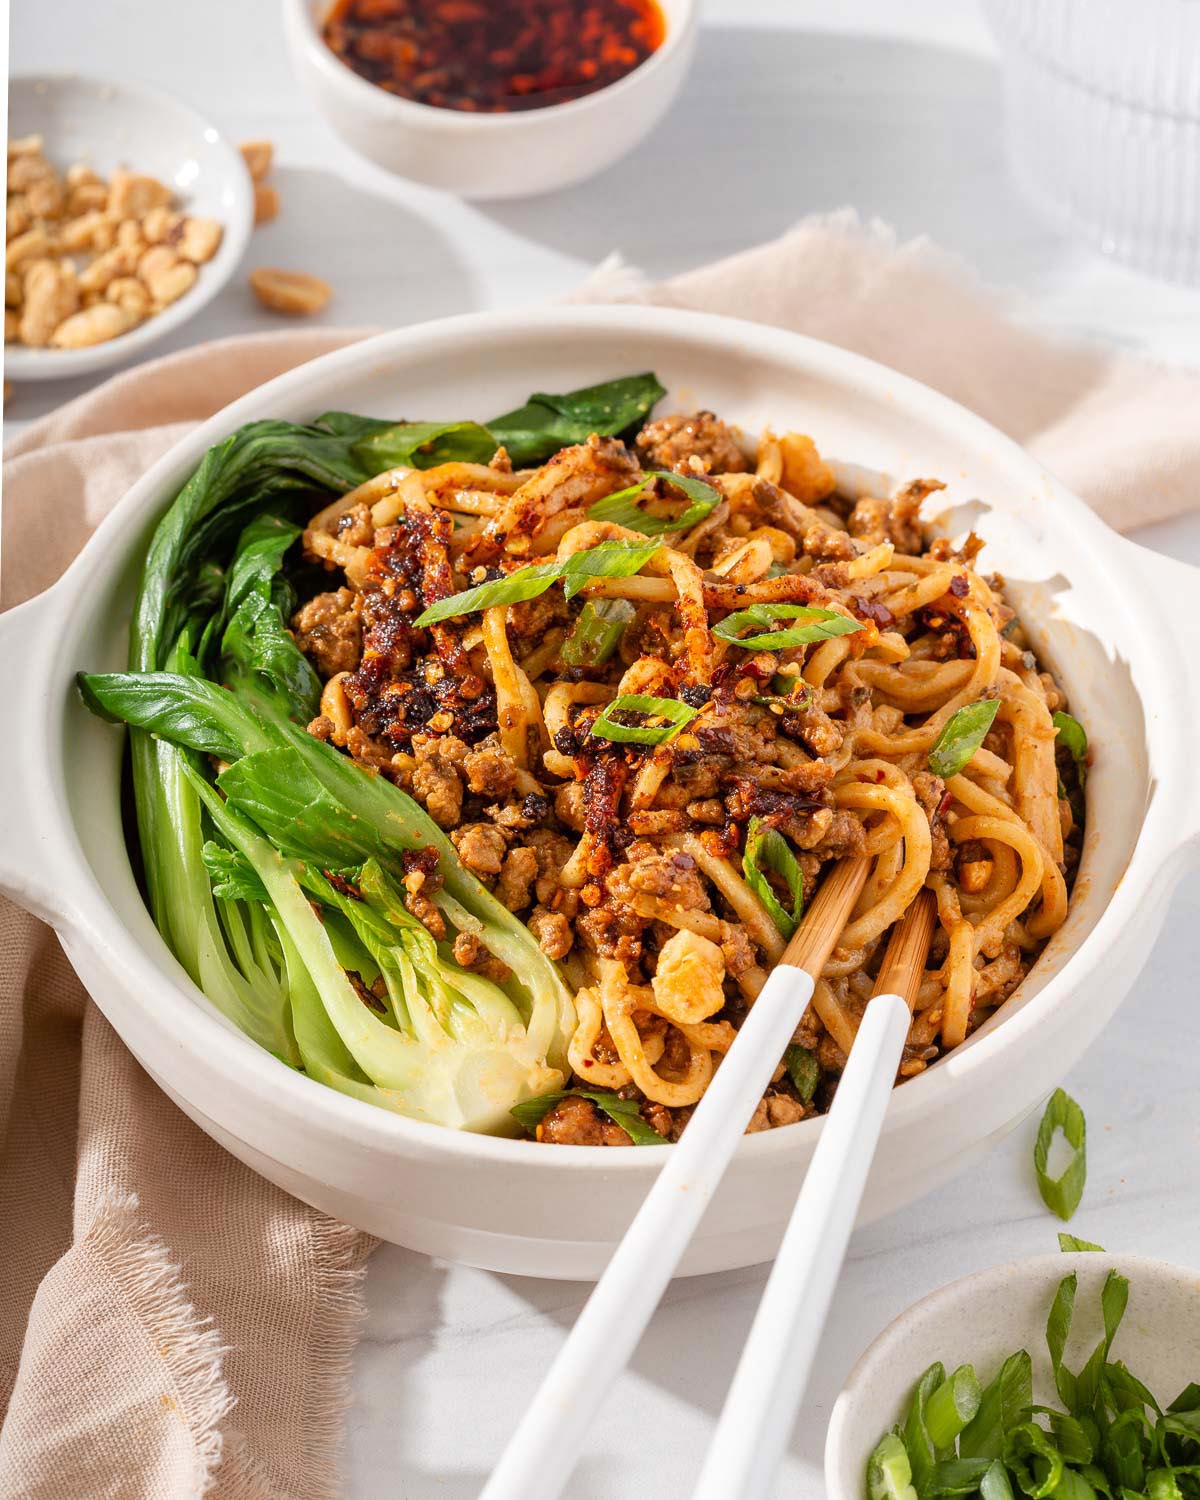 Up close of a bowl of dan dan mian with peanuts, chili oil, and sliced green onions nearby.